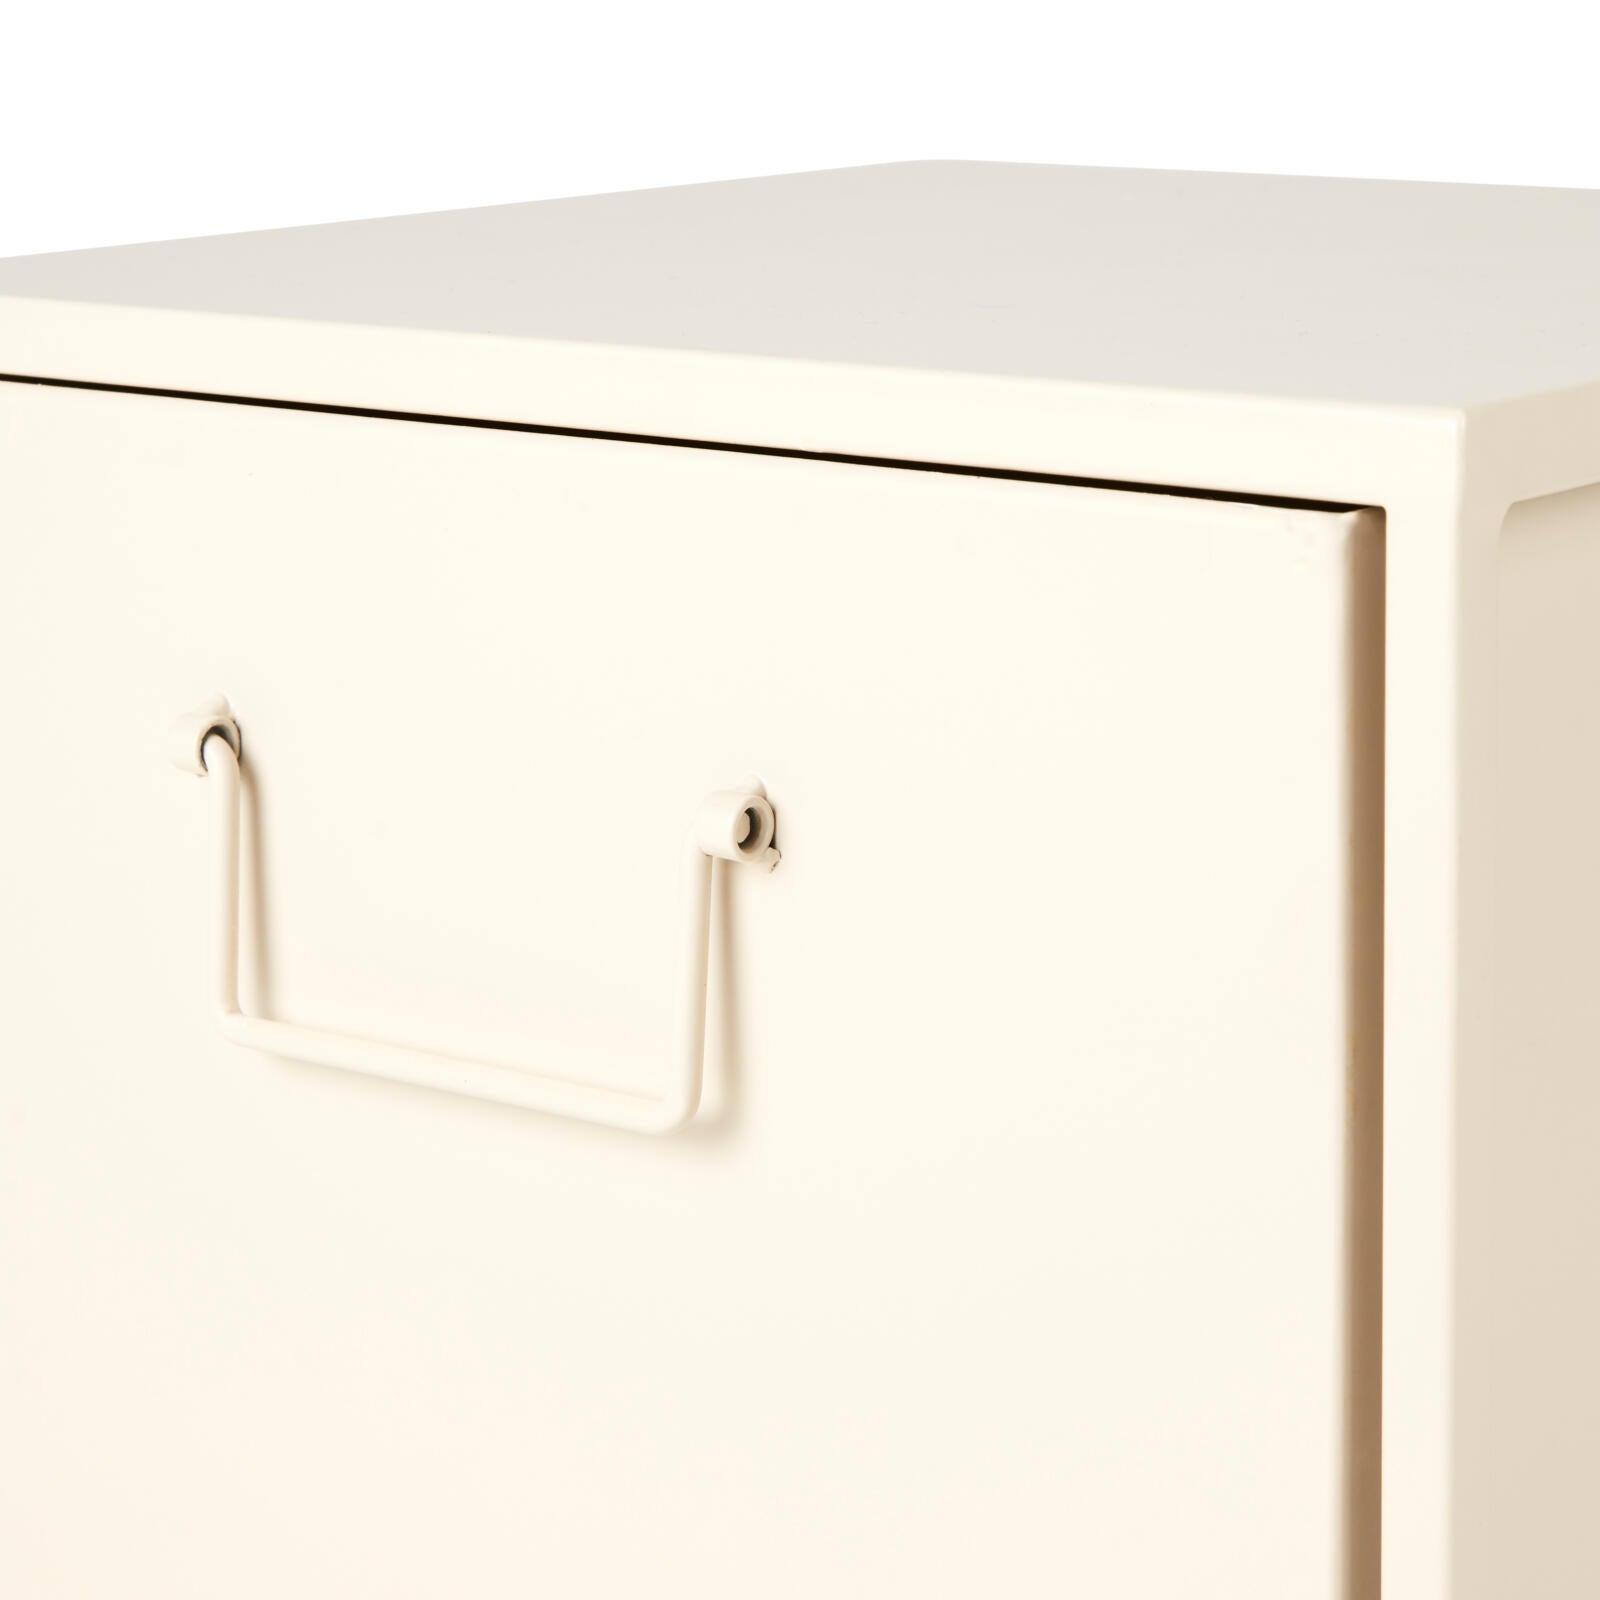 PHARMA Chest of drawers 2 drawers sand